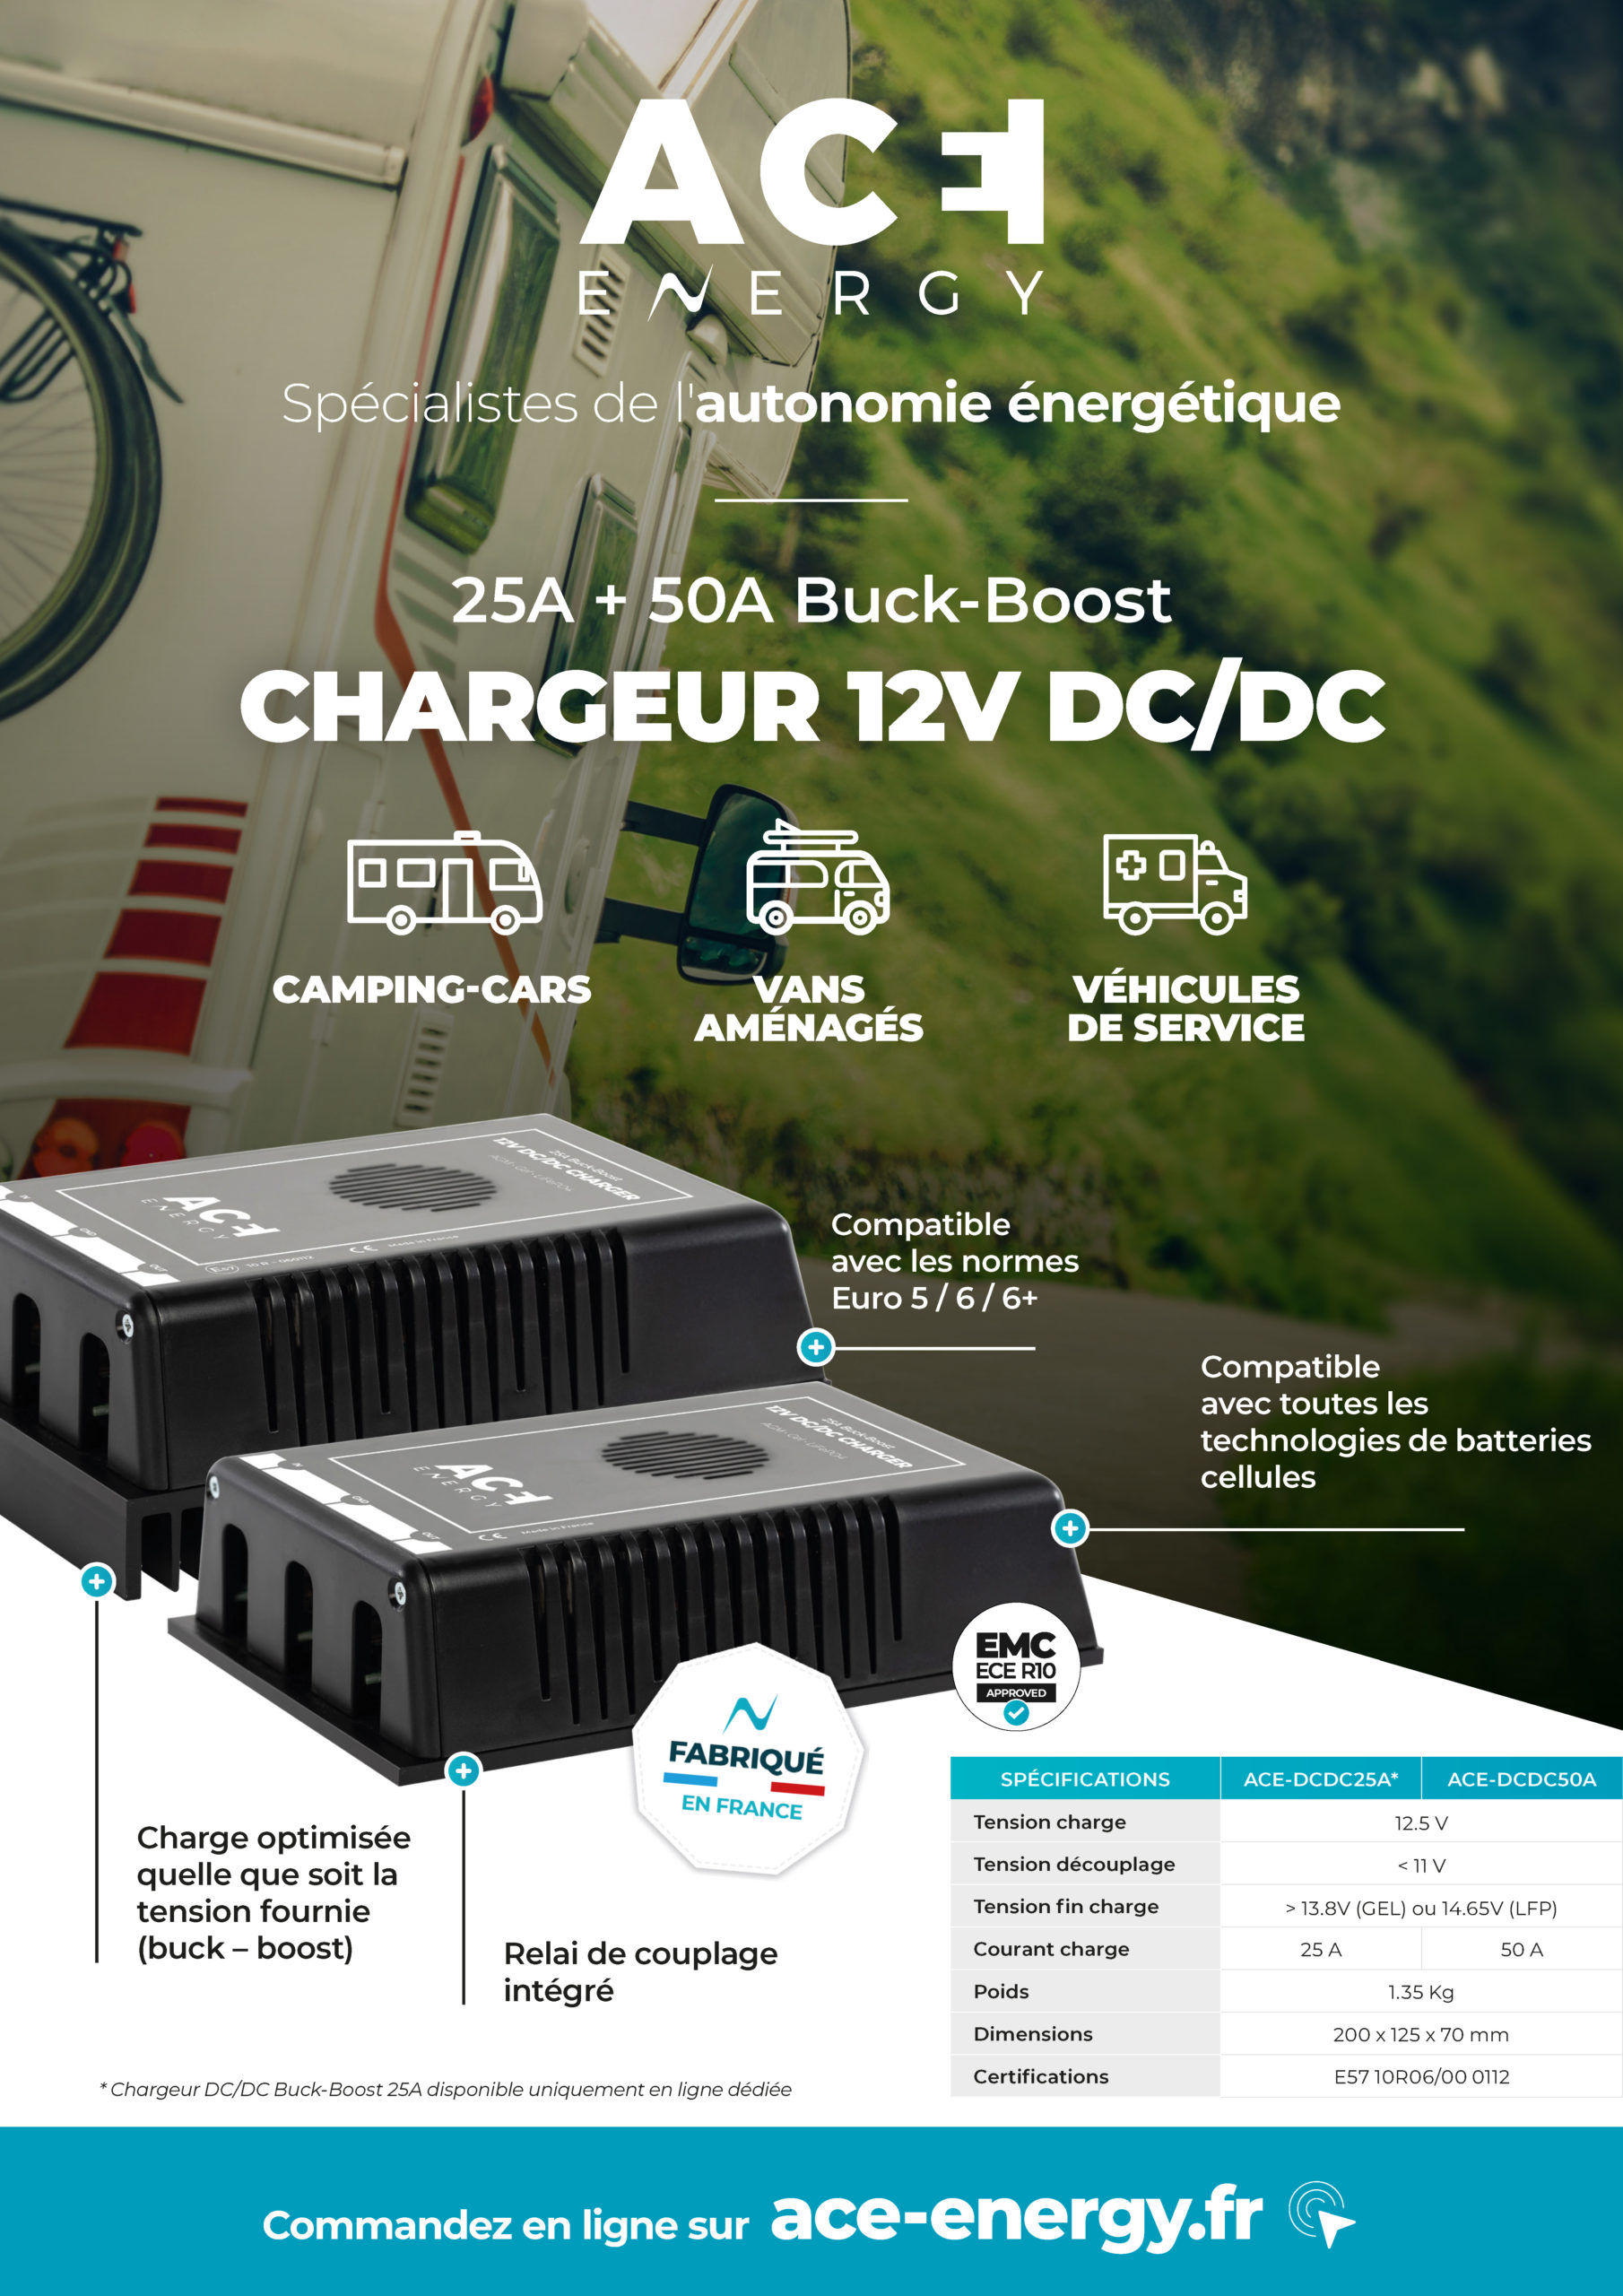 Chargeur DC/DC Buck-Boost 50A - ACE Energy